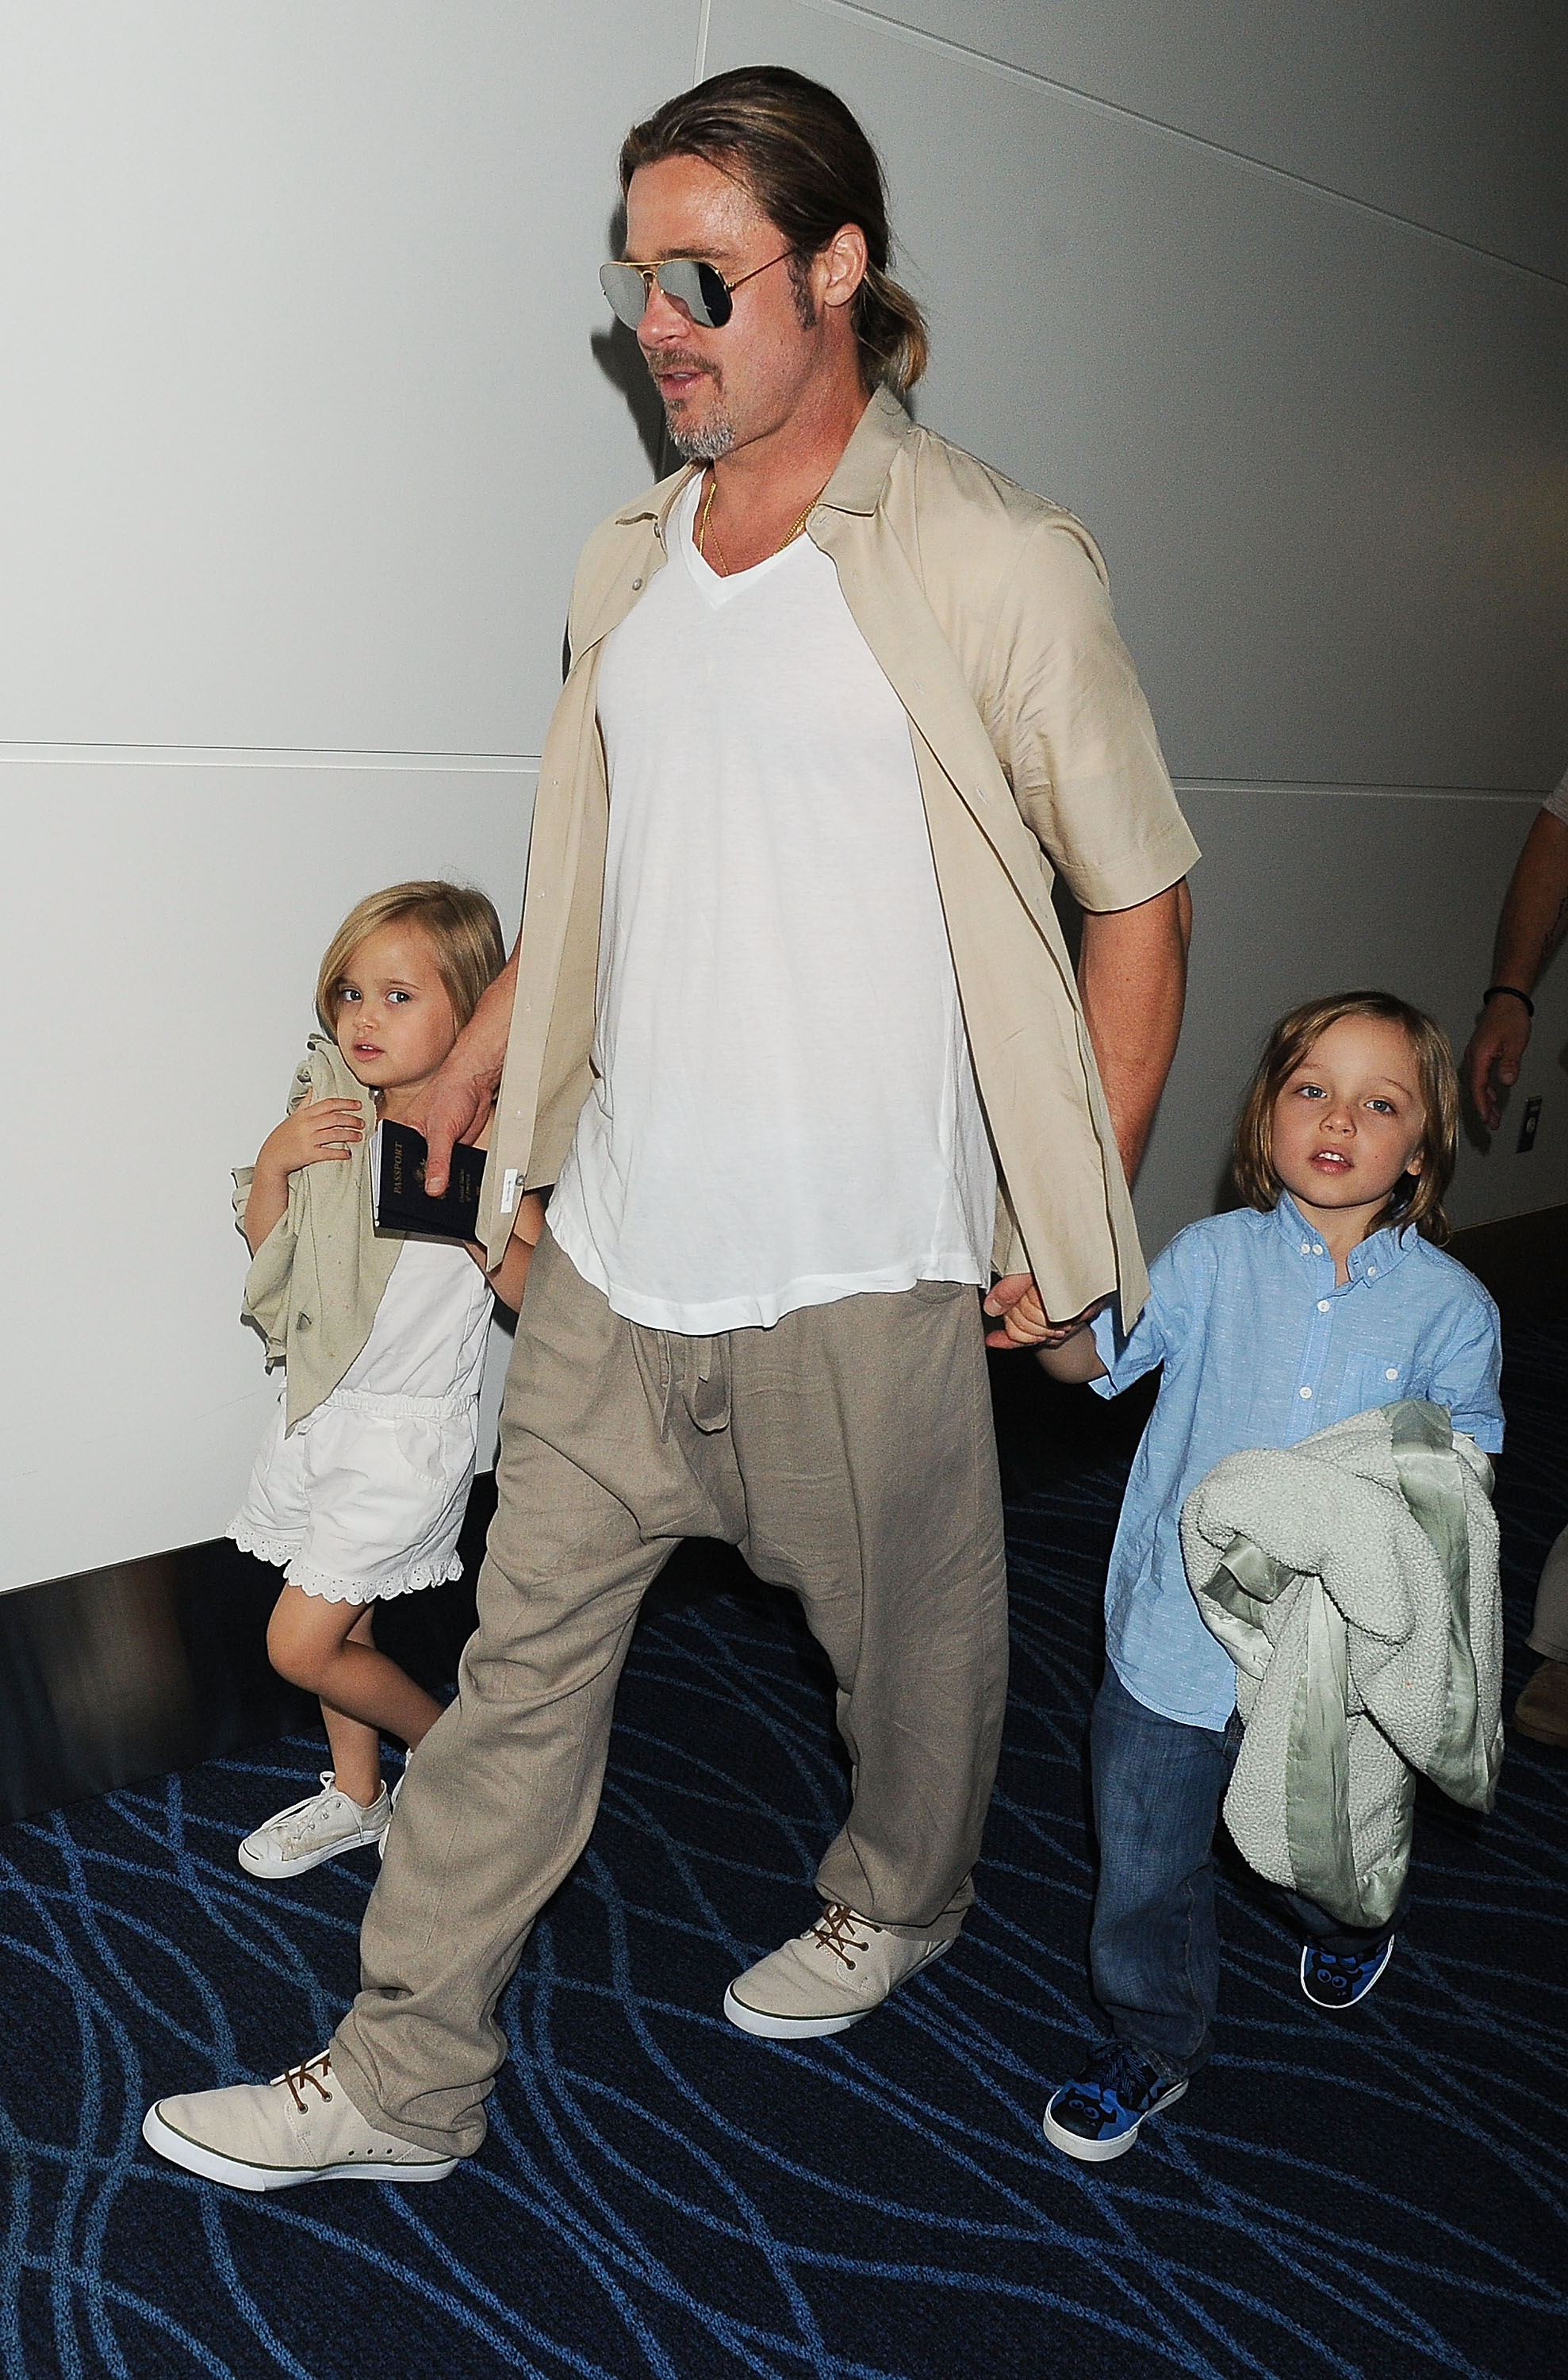 Brad Pitt and his twin children Knox and Vivienne Jolie-Pitt on July 30, 2013, in Tokyo, Japan | Source: Getty Images